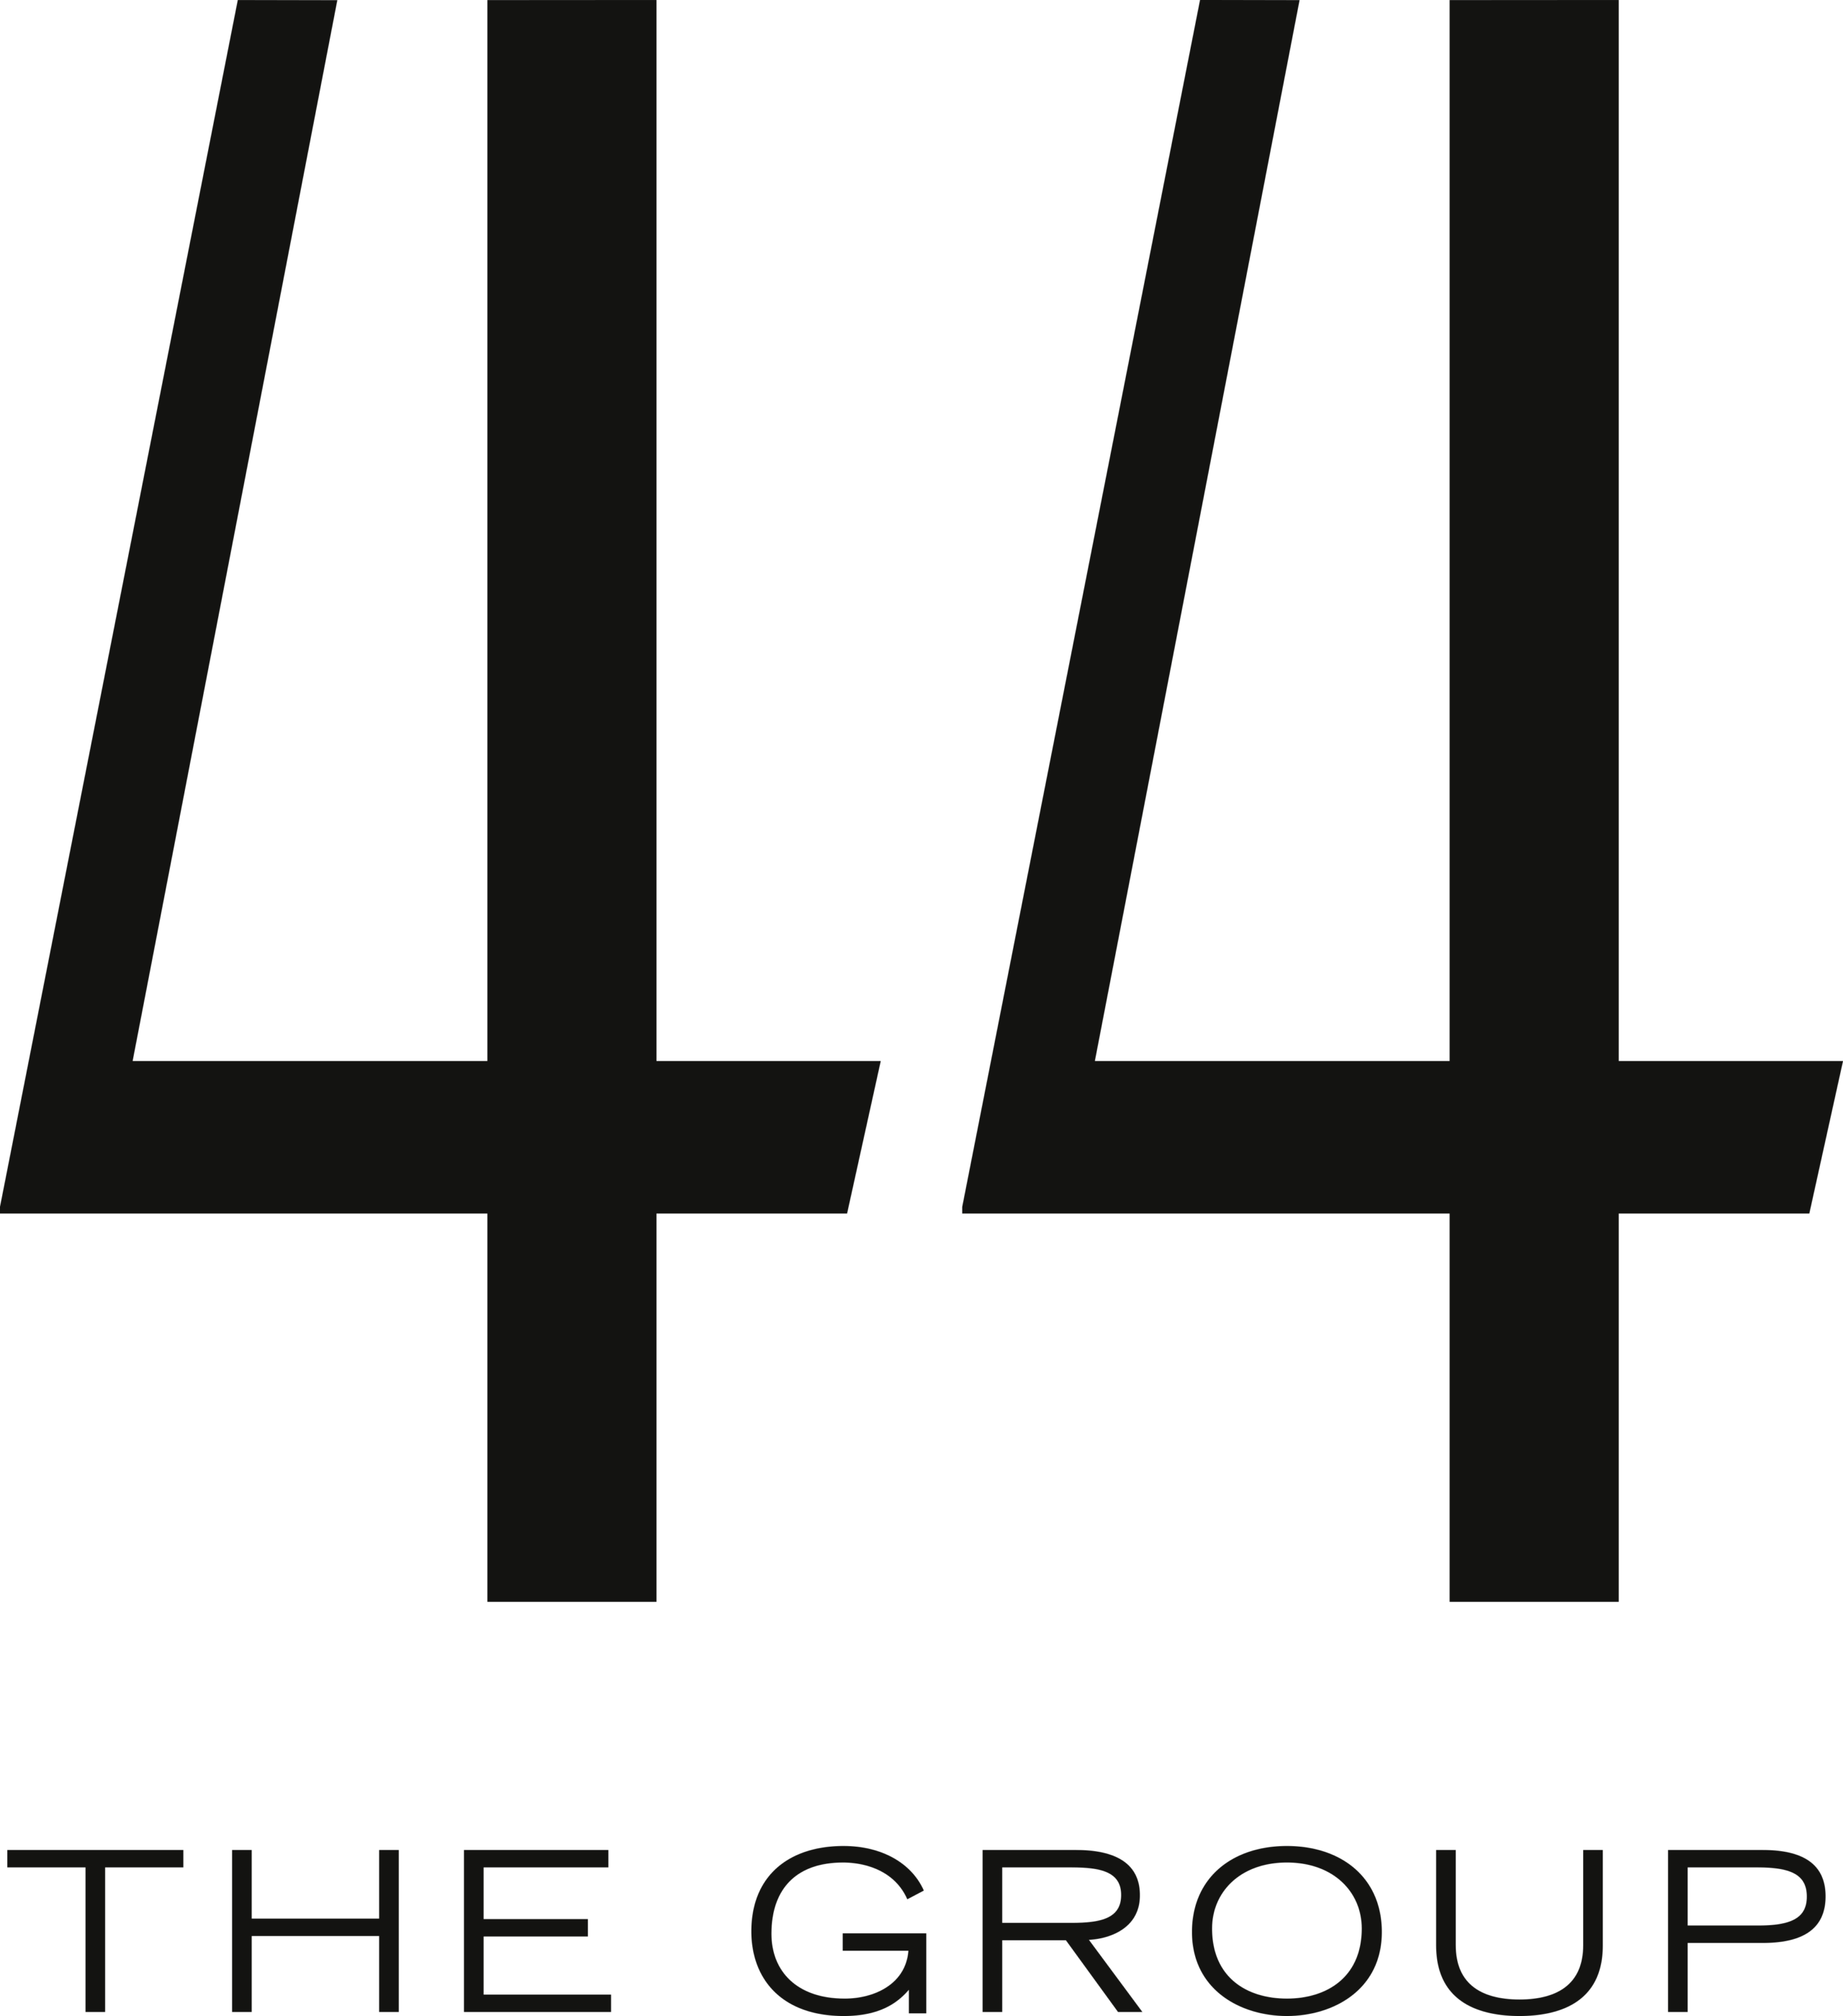 The 44 Group